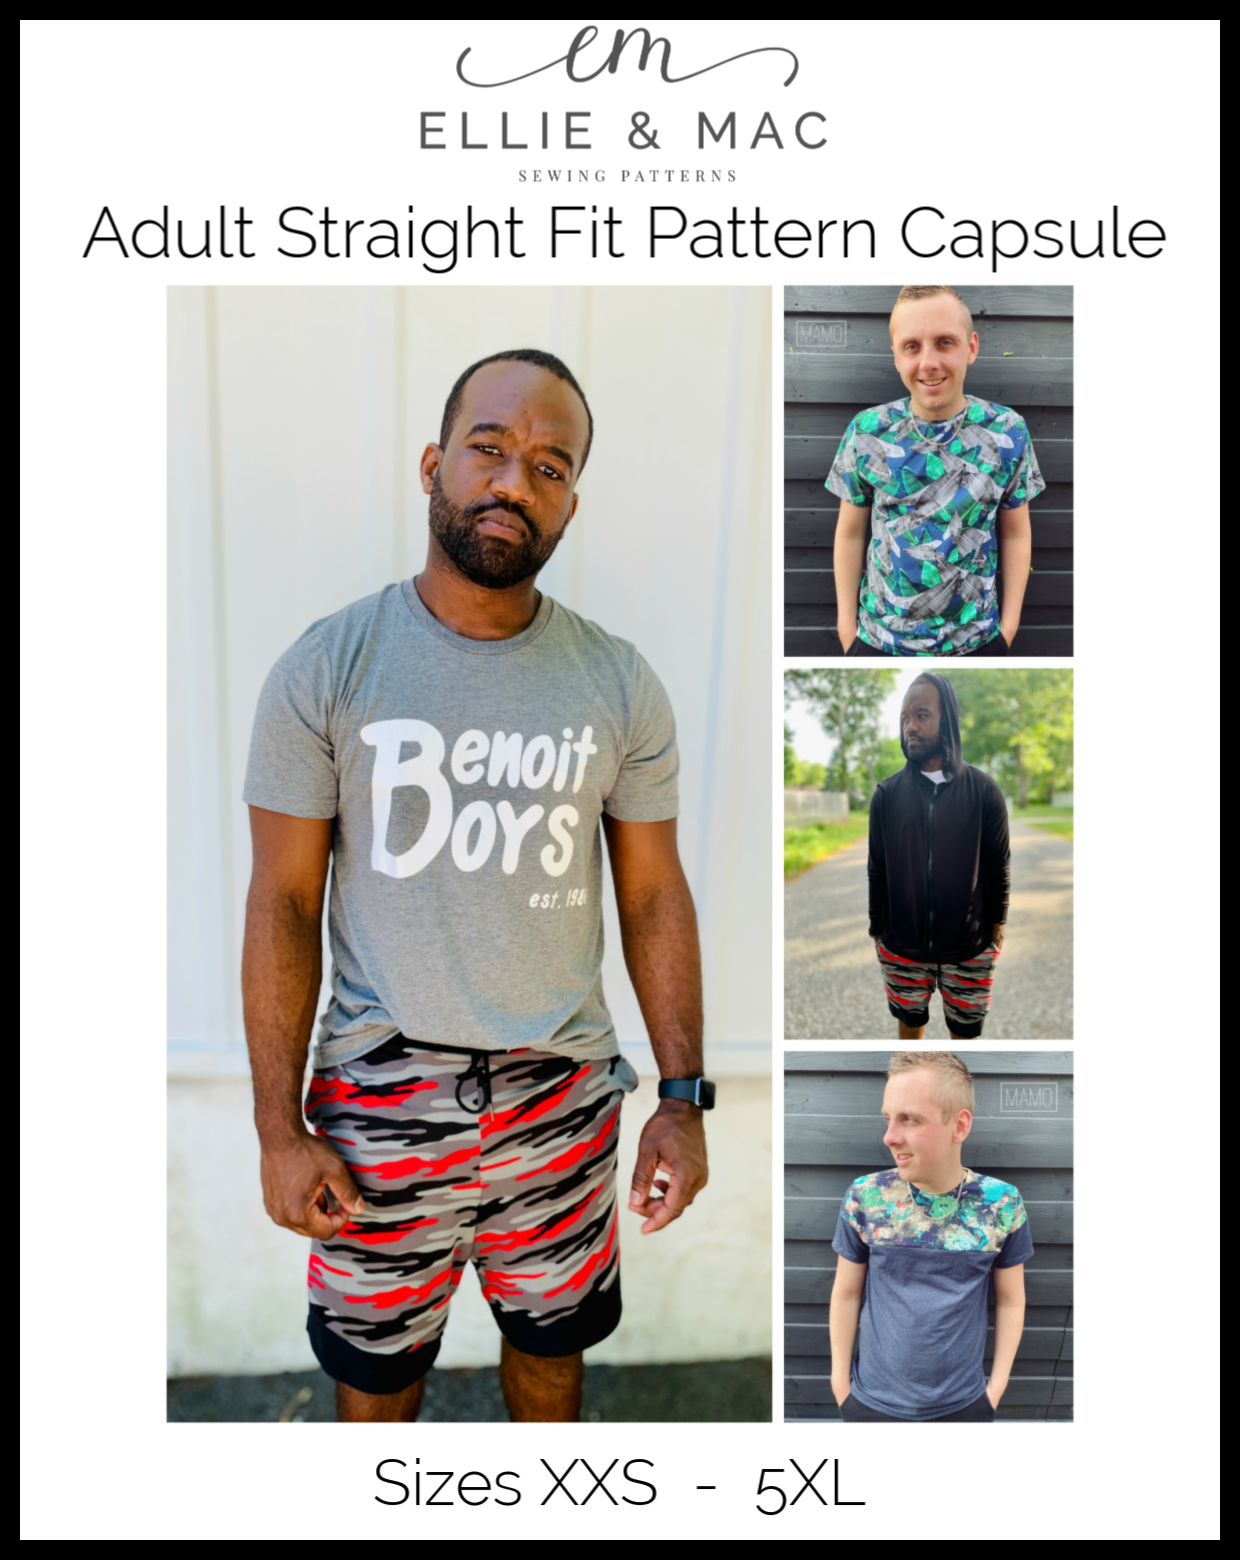 Adult Straight Fit Pattern Capsule